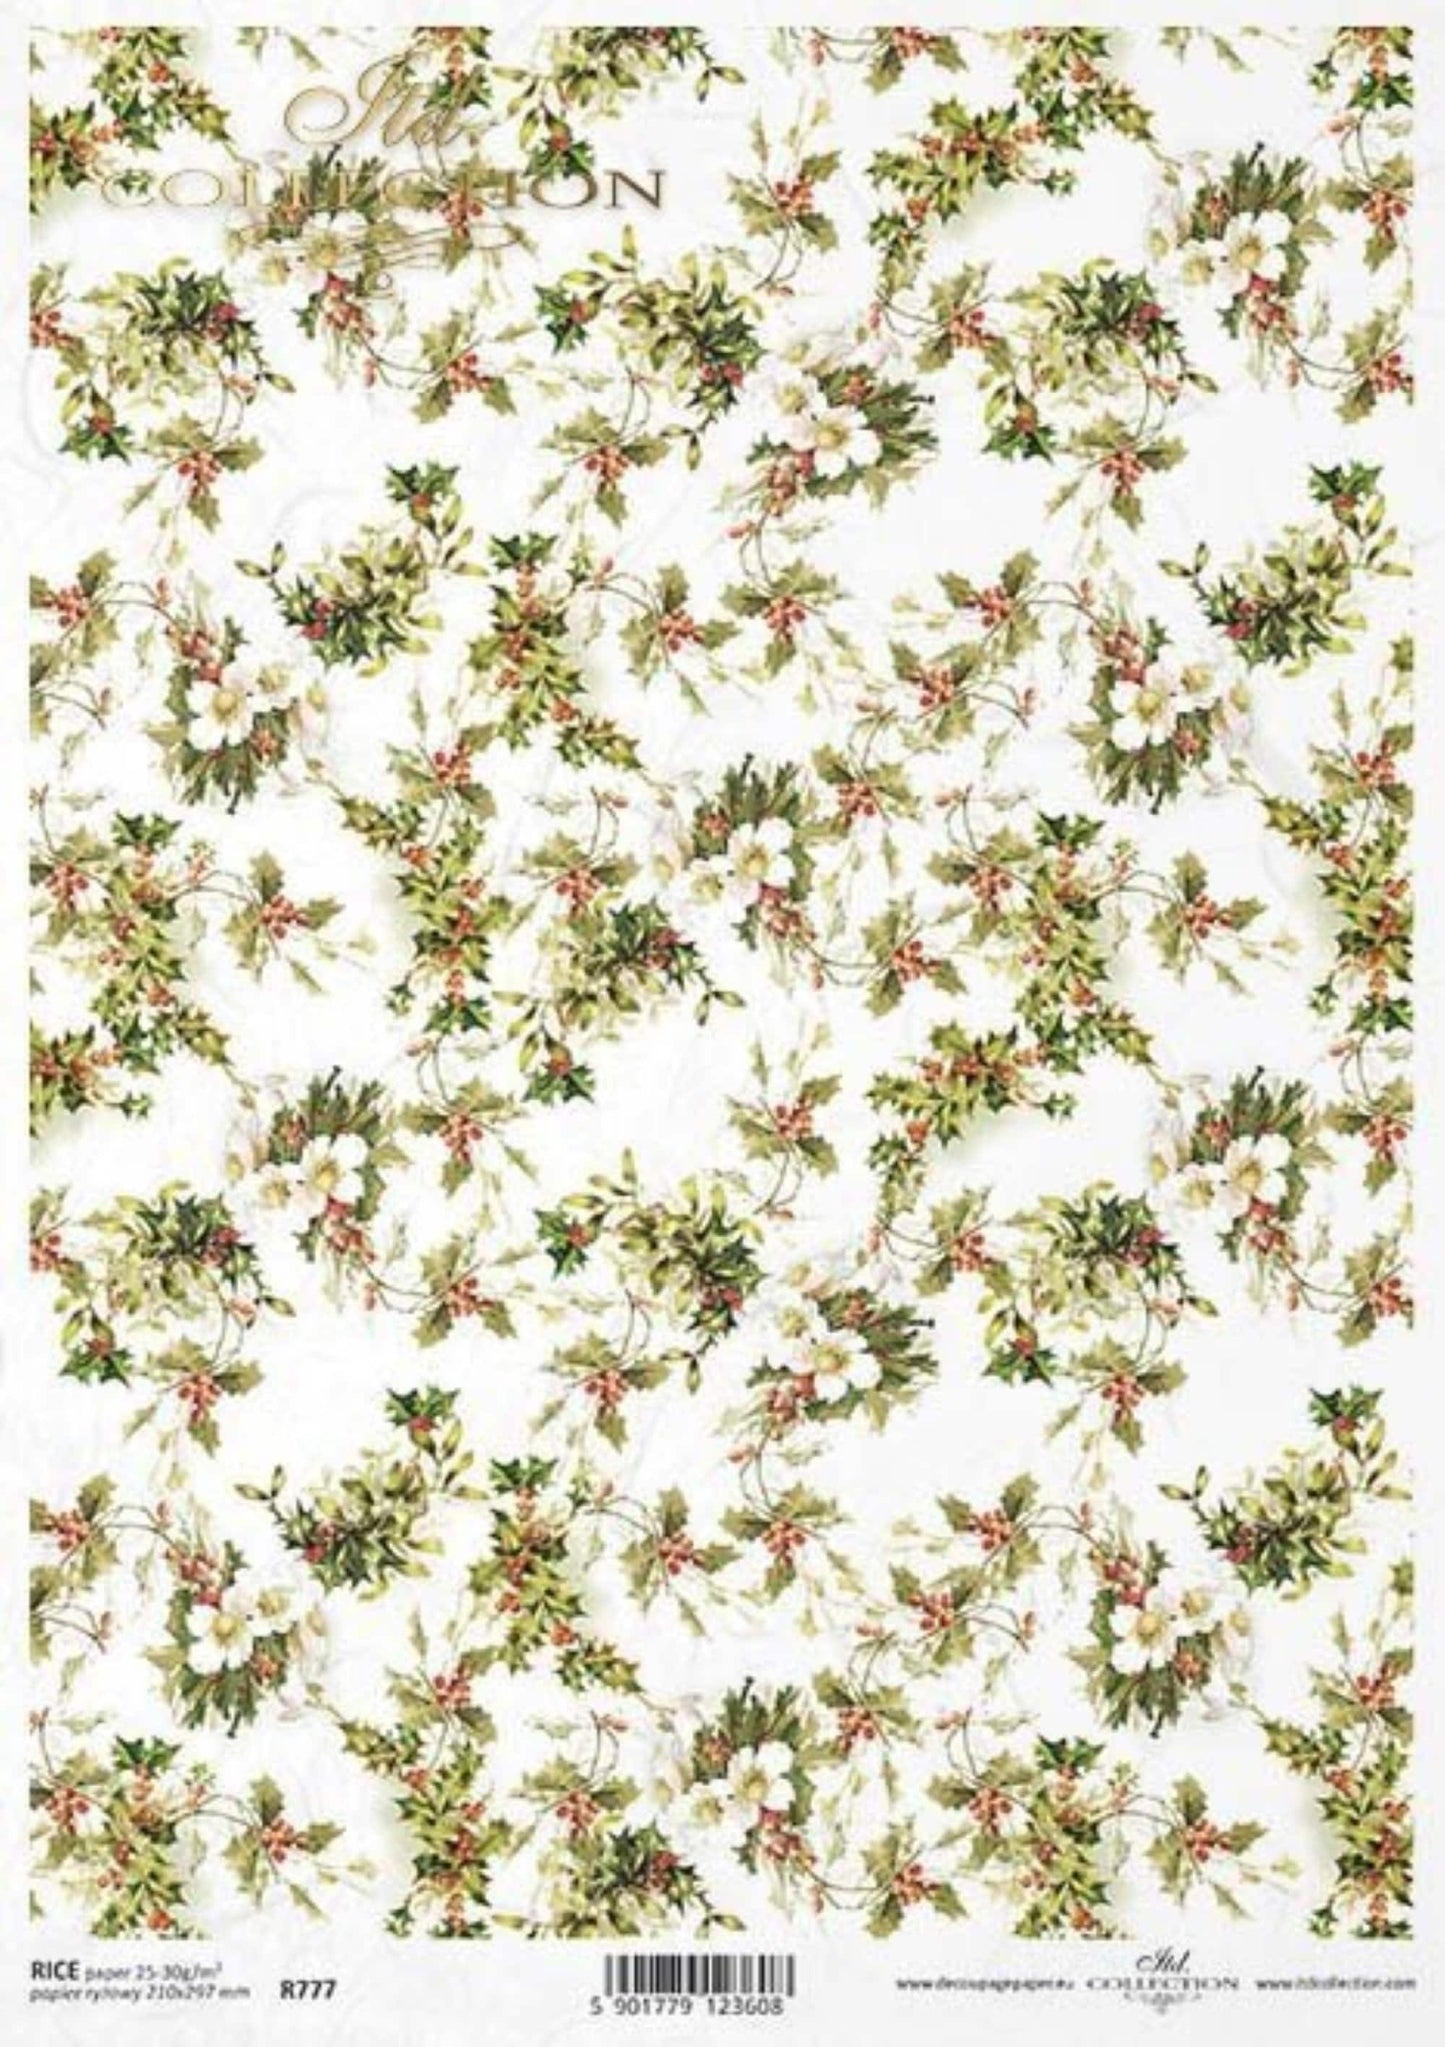 ITD Collection Rice Paper for Decoupage R0777, Size A4 - 210x297 mm, 8.27x11.7 inch, Christmas Holly, Flowers, Floral Trim